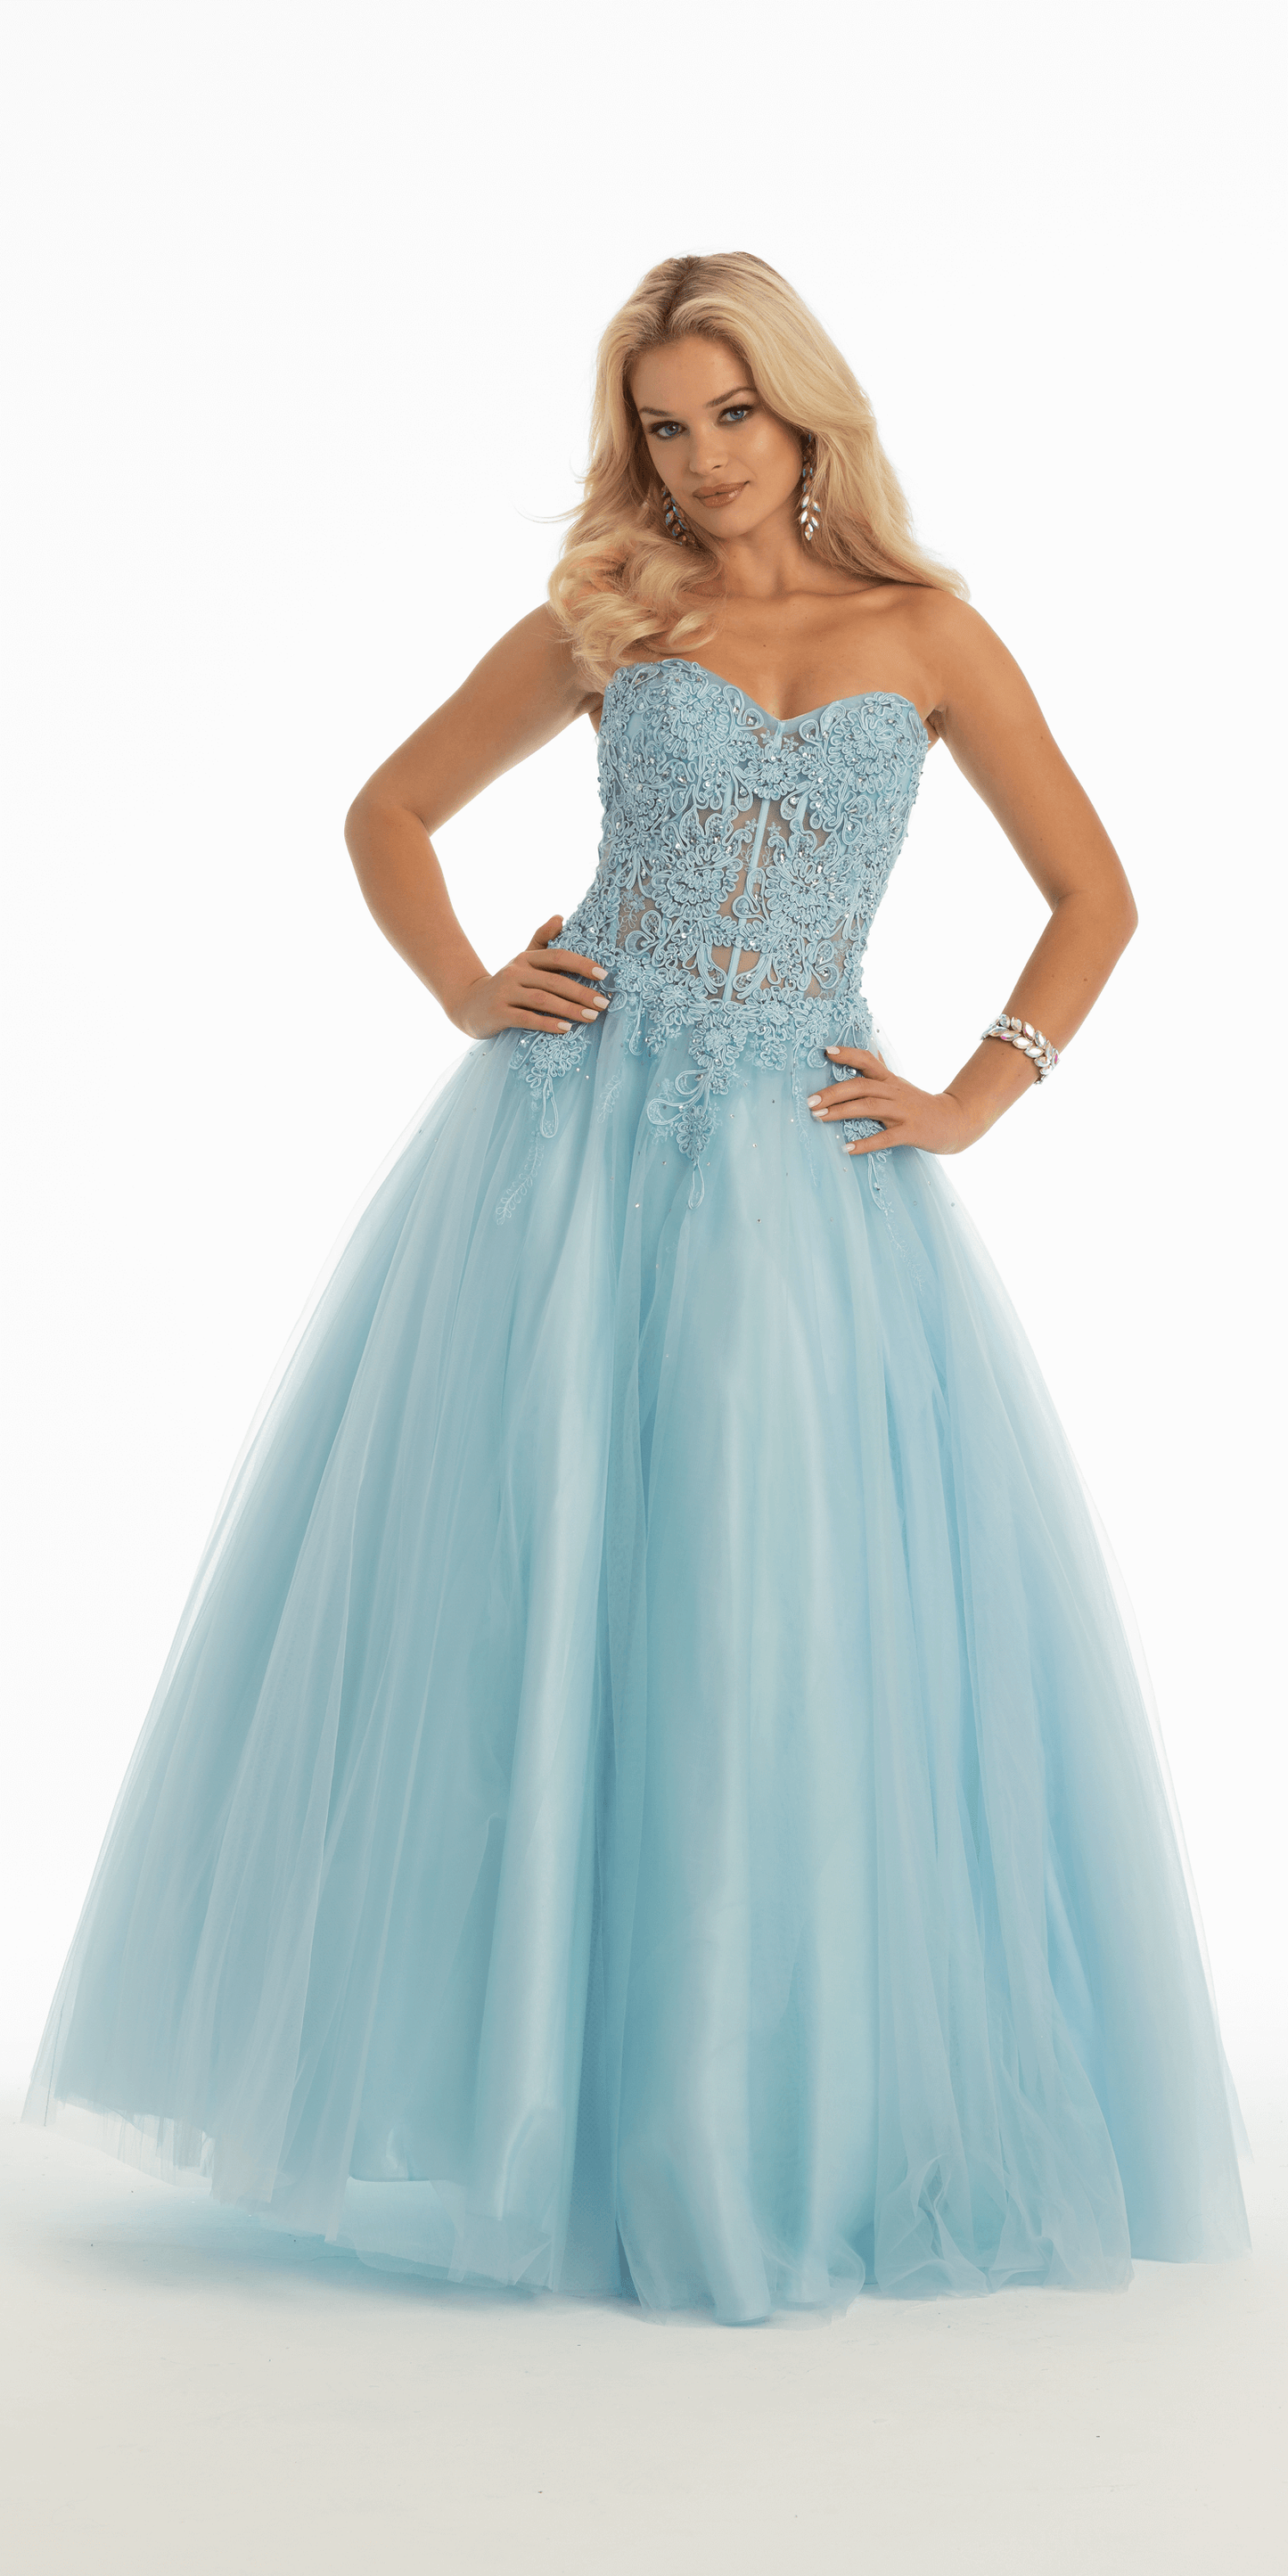 Camille La Vie Sweetheart Embroidered Corset Ballgown with Heat Set Stones missy / 0 / sky-blue